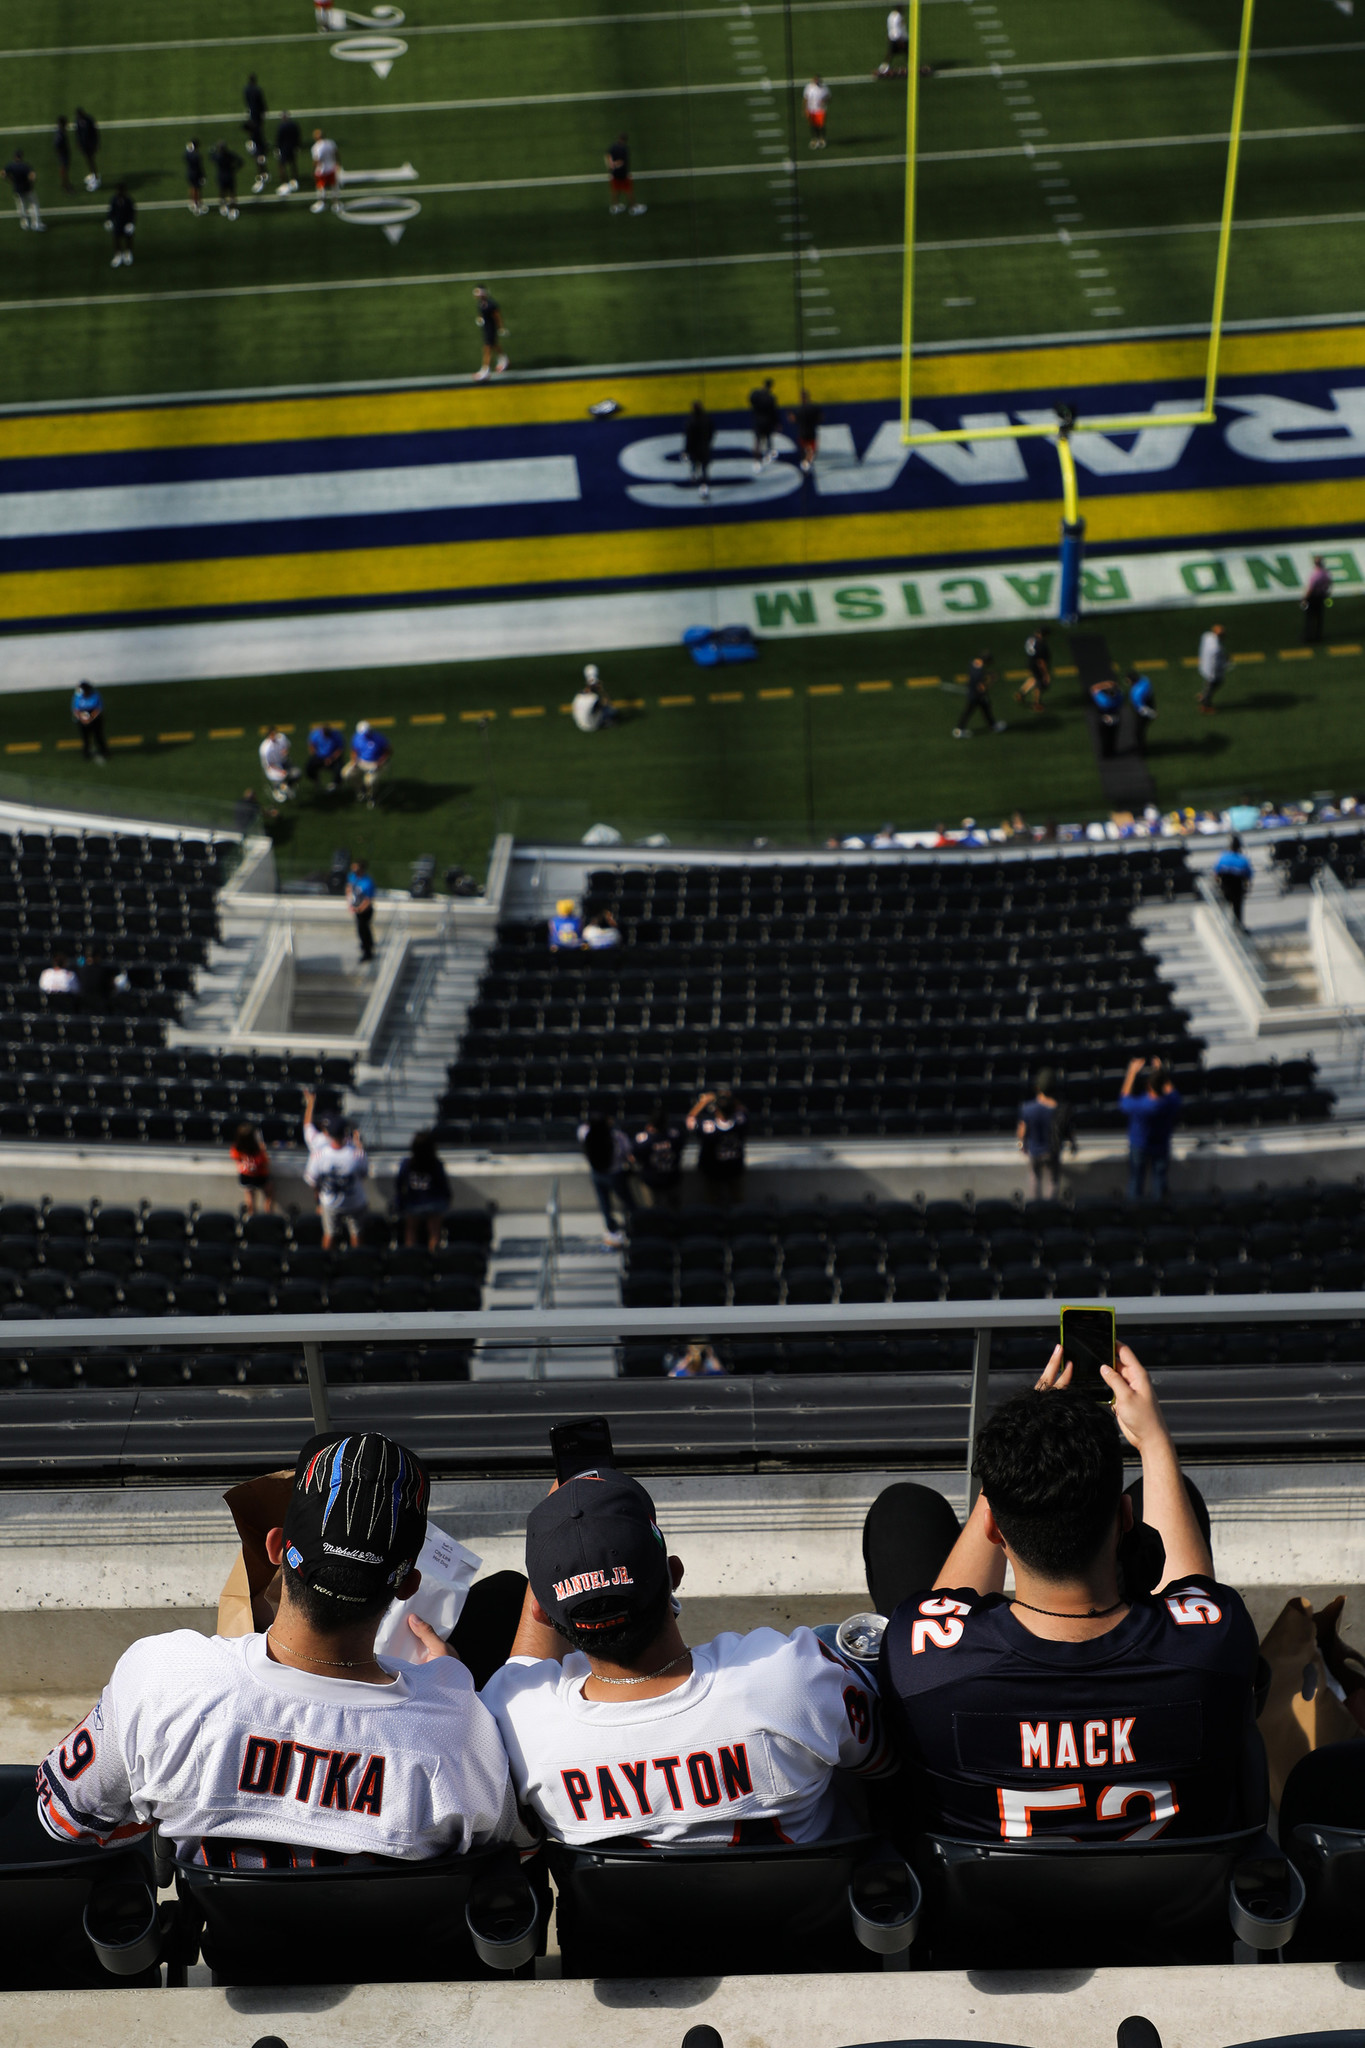 Rams fans get a look inside SoFi Stadium, with visions of Super